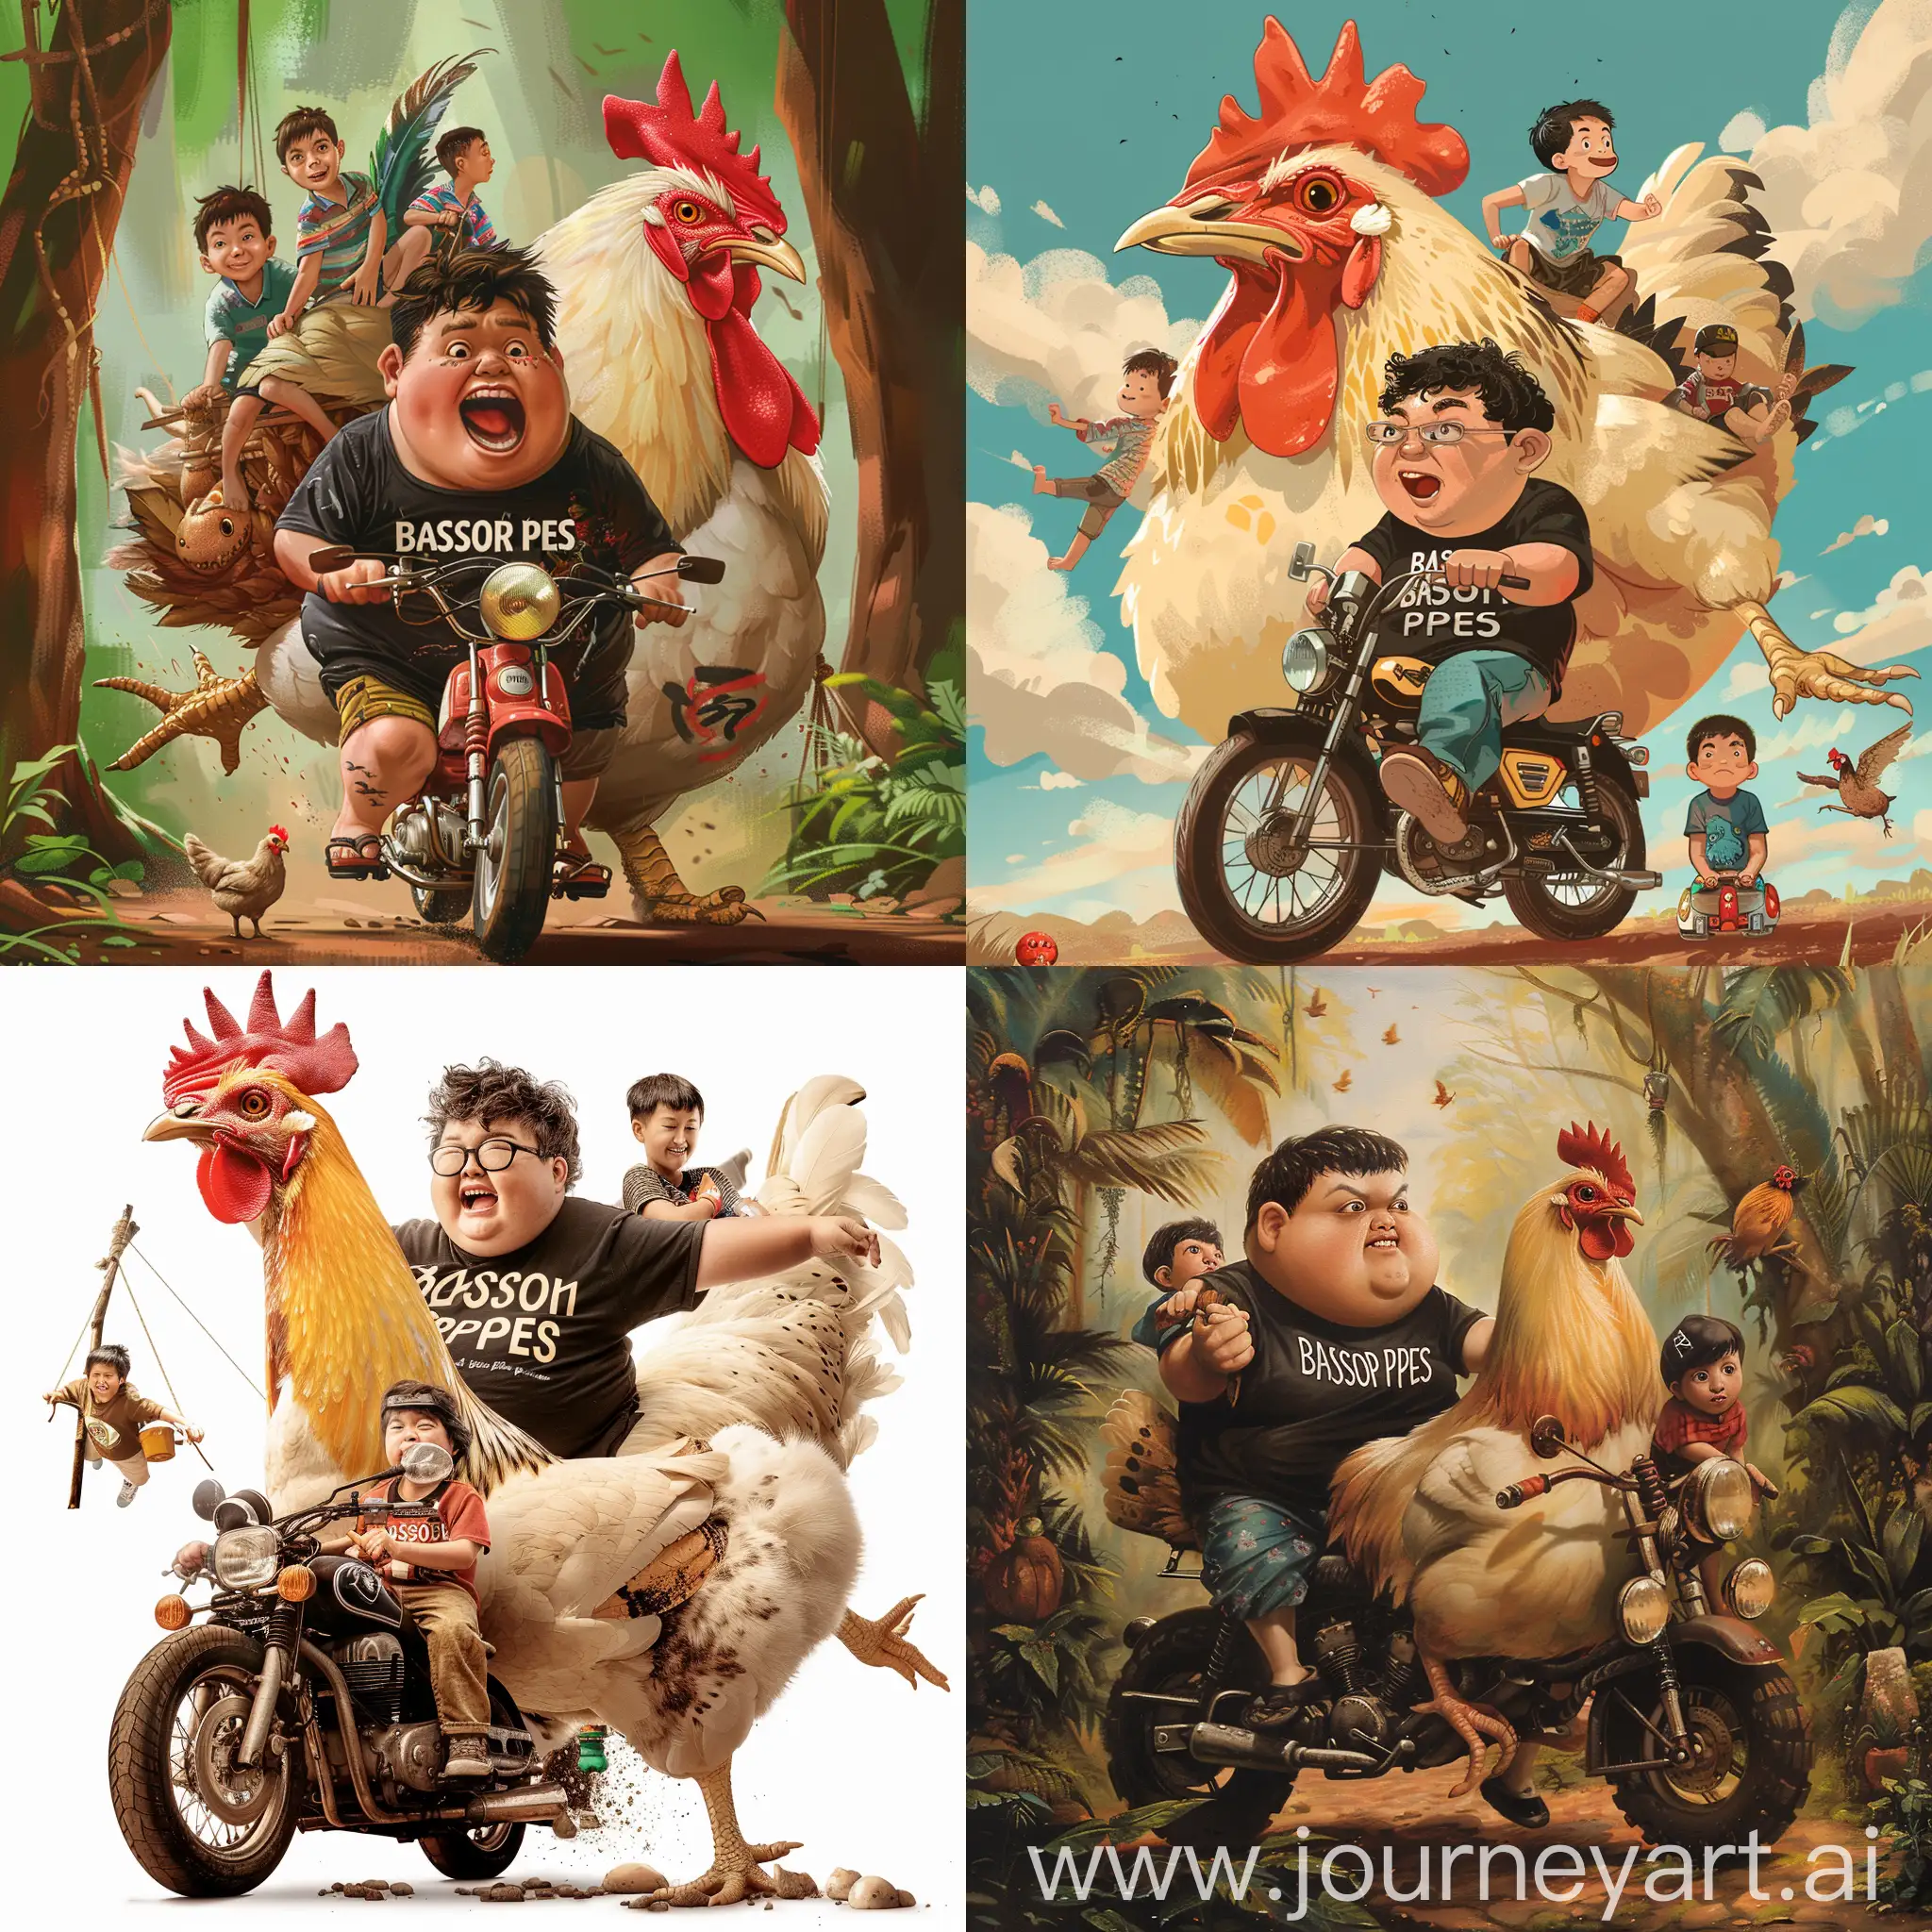 A chuby boys wearing black t-shirt with texs "BASORI PERS" riding a motorcycle with a giant hen and two child boy on the giant hen